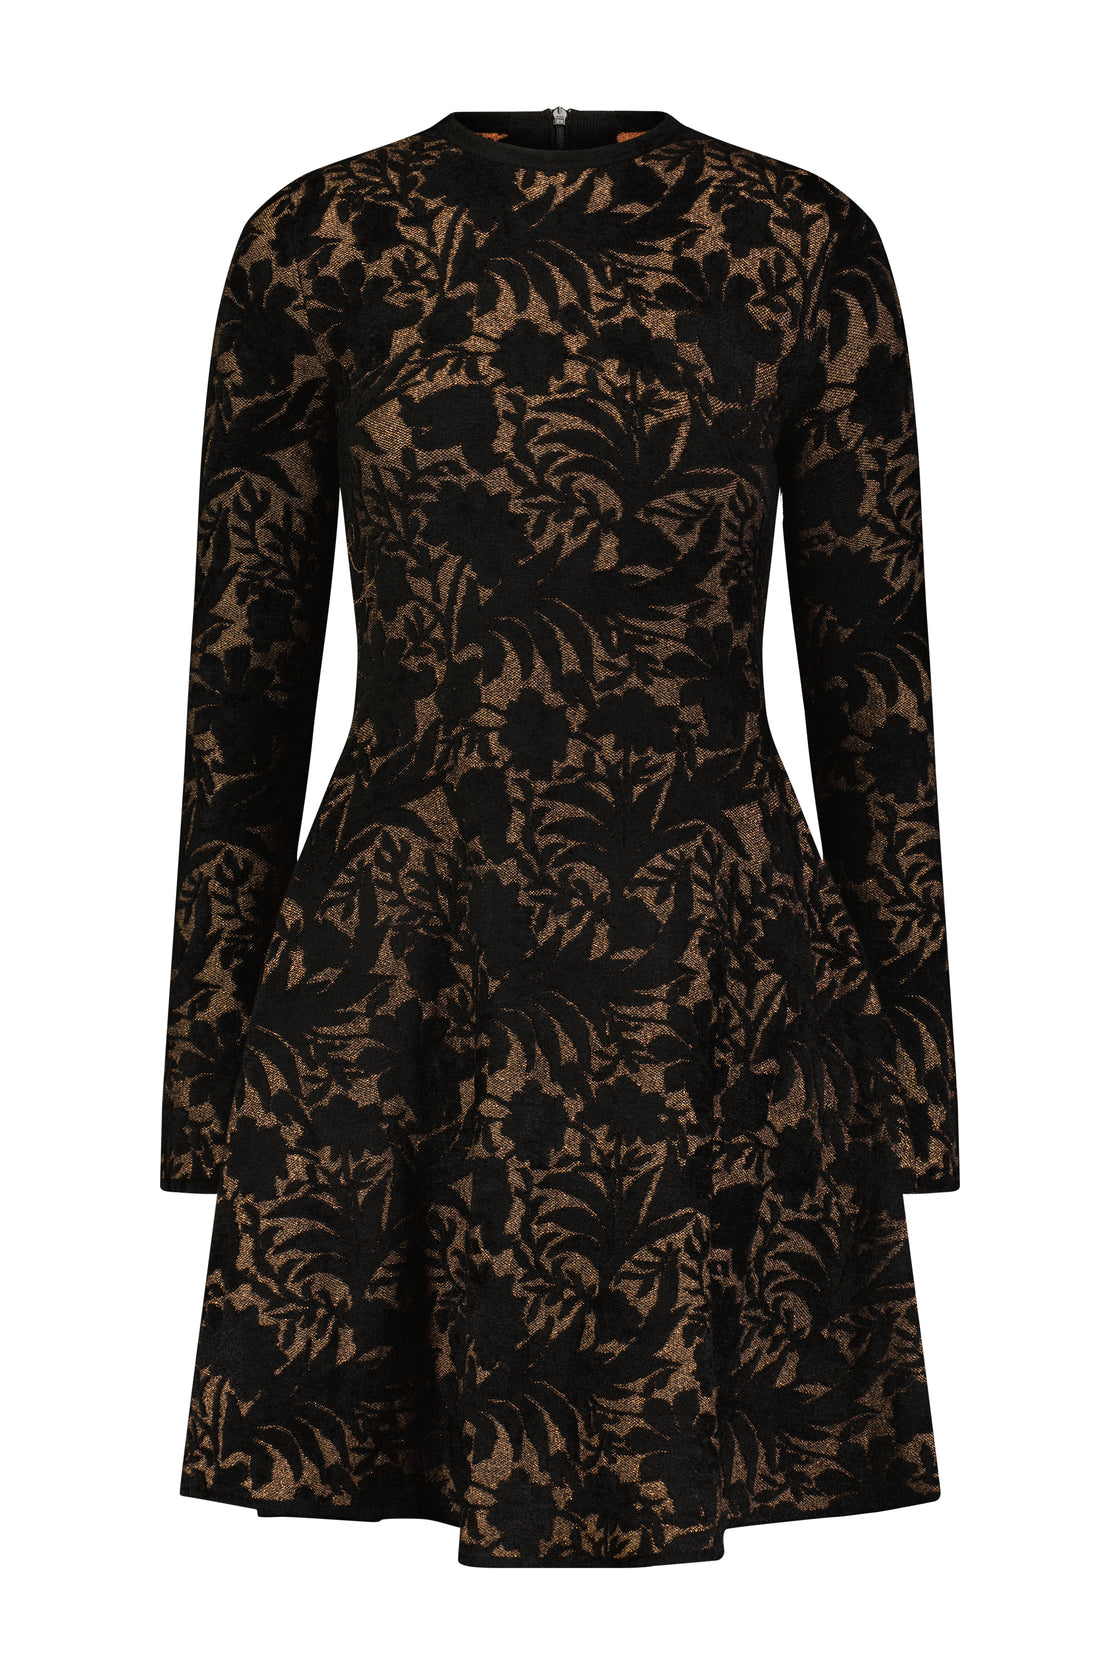 Metallic Jacquard Knit Long Sleeve Fit and Flare Dress